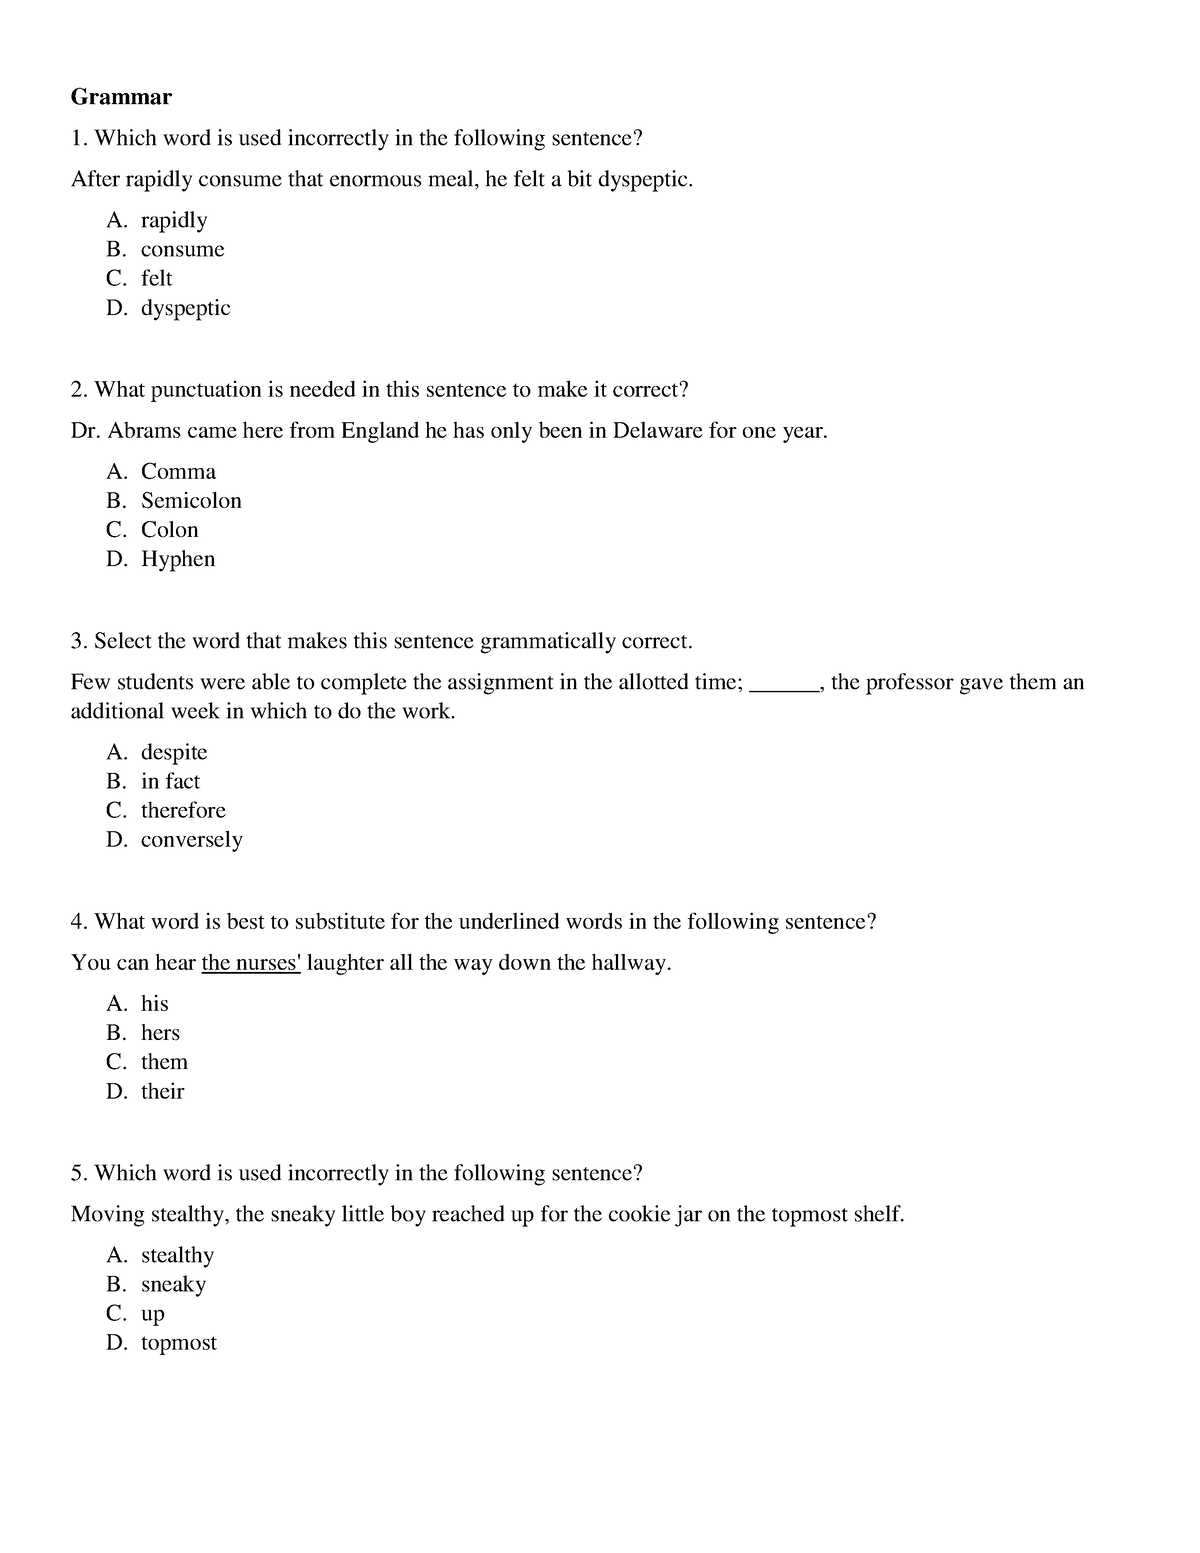 grammar-65-questions-and-answers-grammar-which-word-is-used